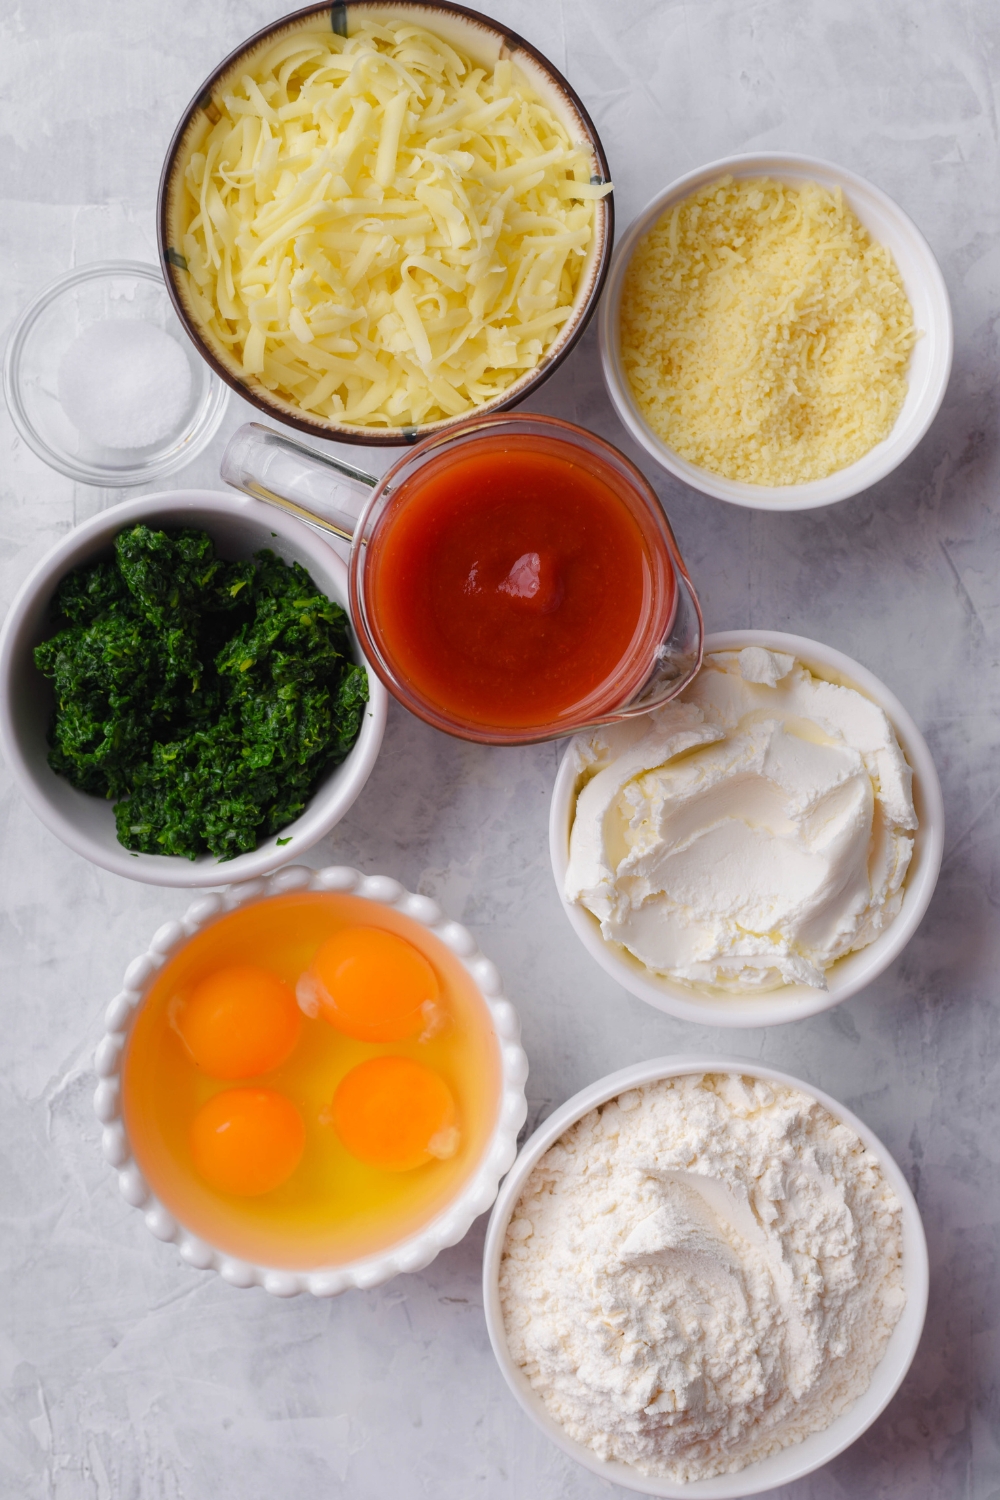 A countertop with all the ingredients to make manicotti crepes. Parmesan cheese, mozzarella cheese, ricotta cheese, salt, marinara sauce, thawed and drained chopped spinach, cracked eggs, and flour are all in separate bowls on the countertop.